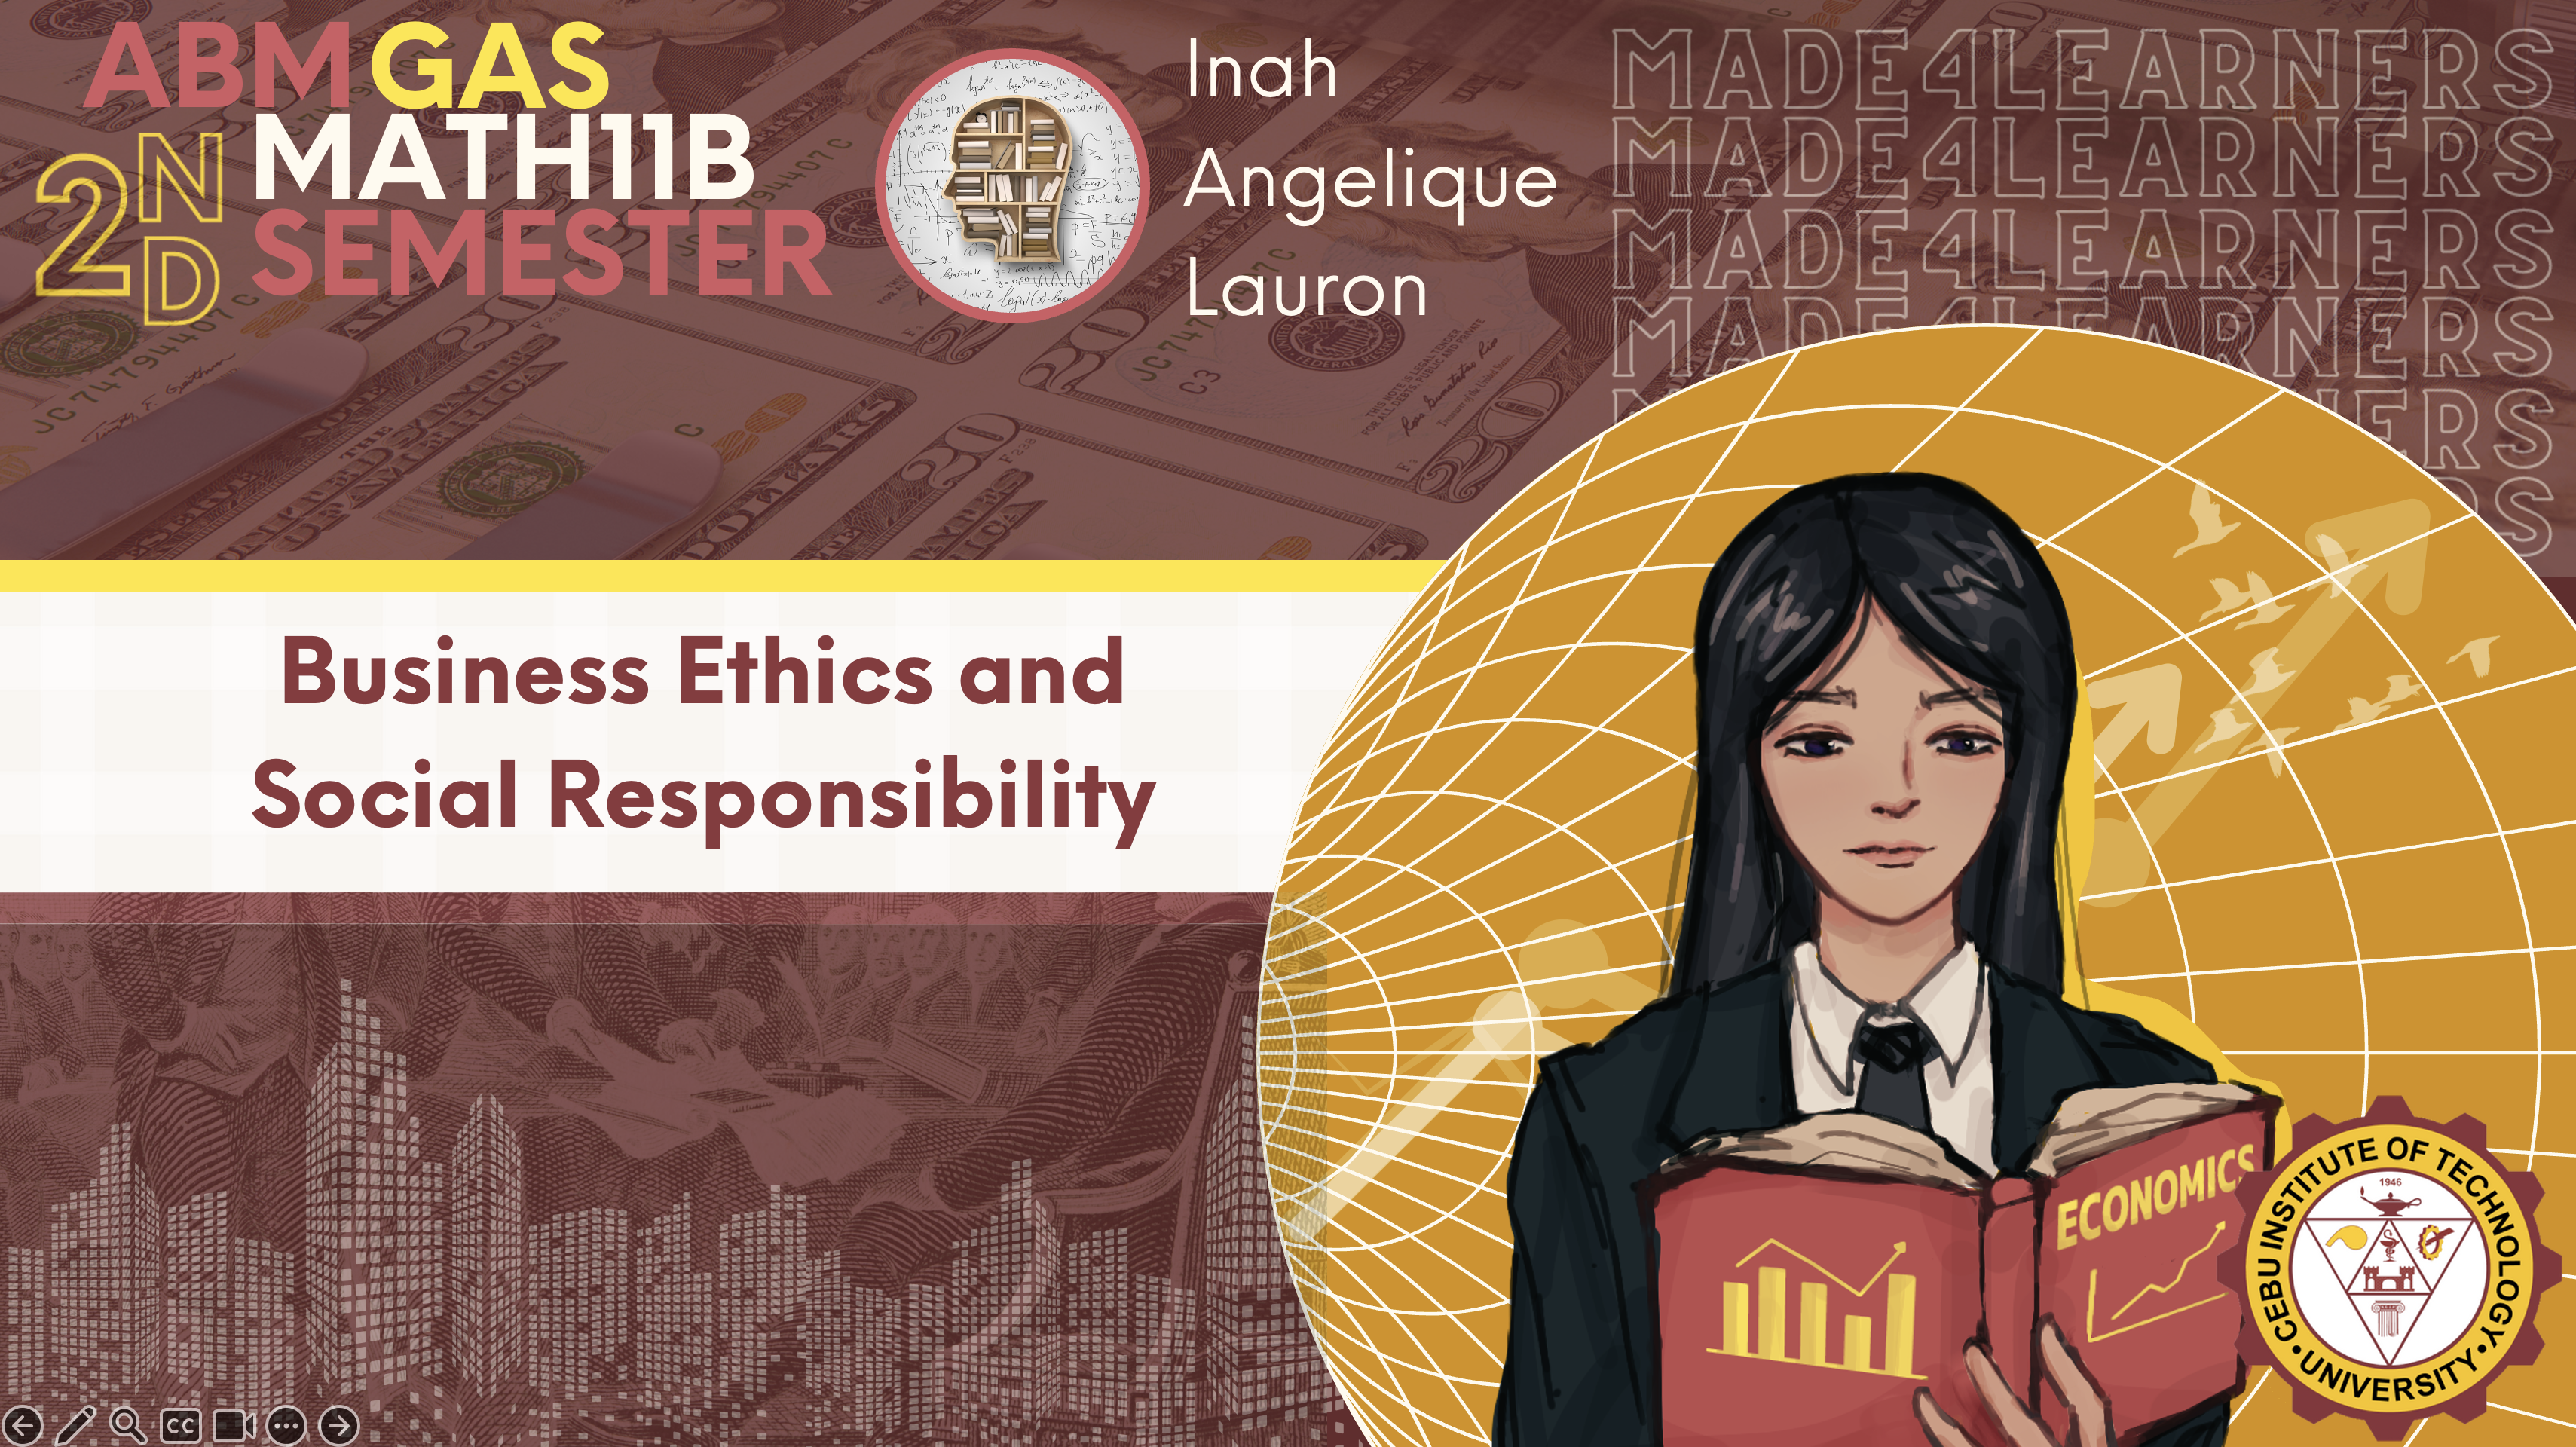 ETHICS: Business Ethics and Social Responsibility (Lauron)